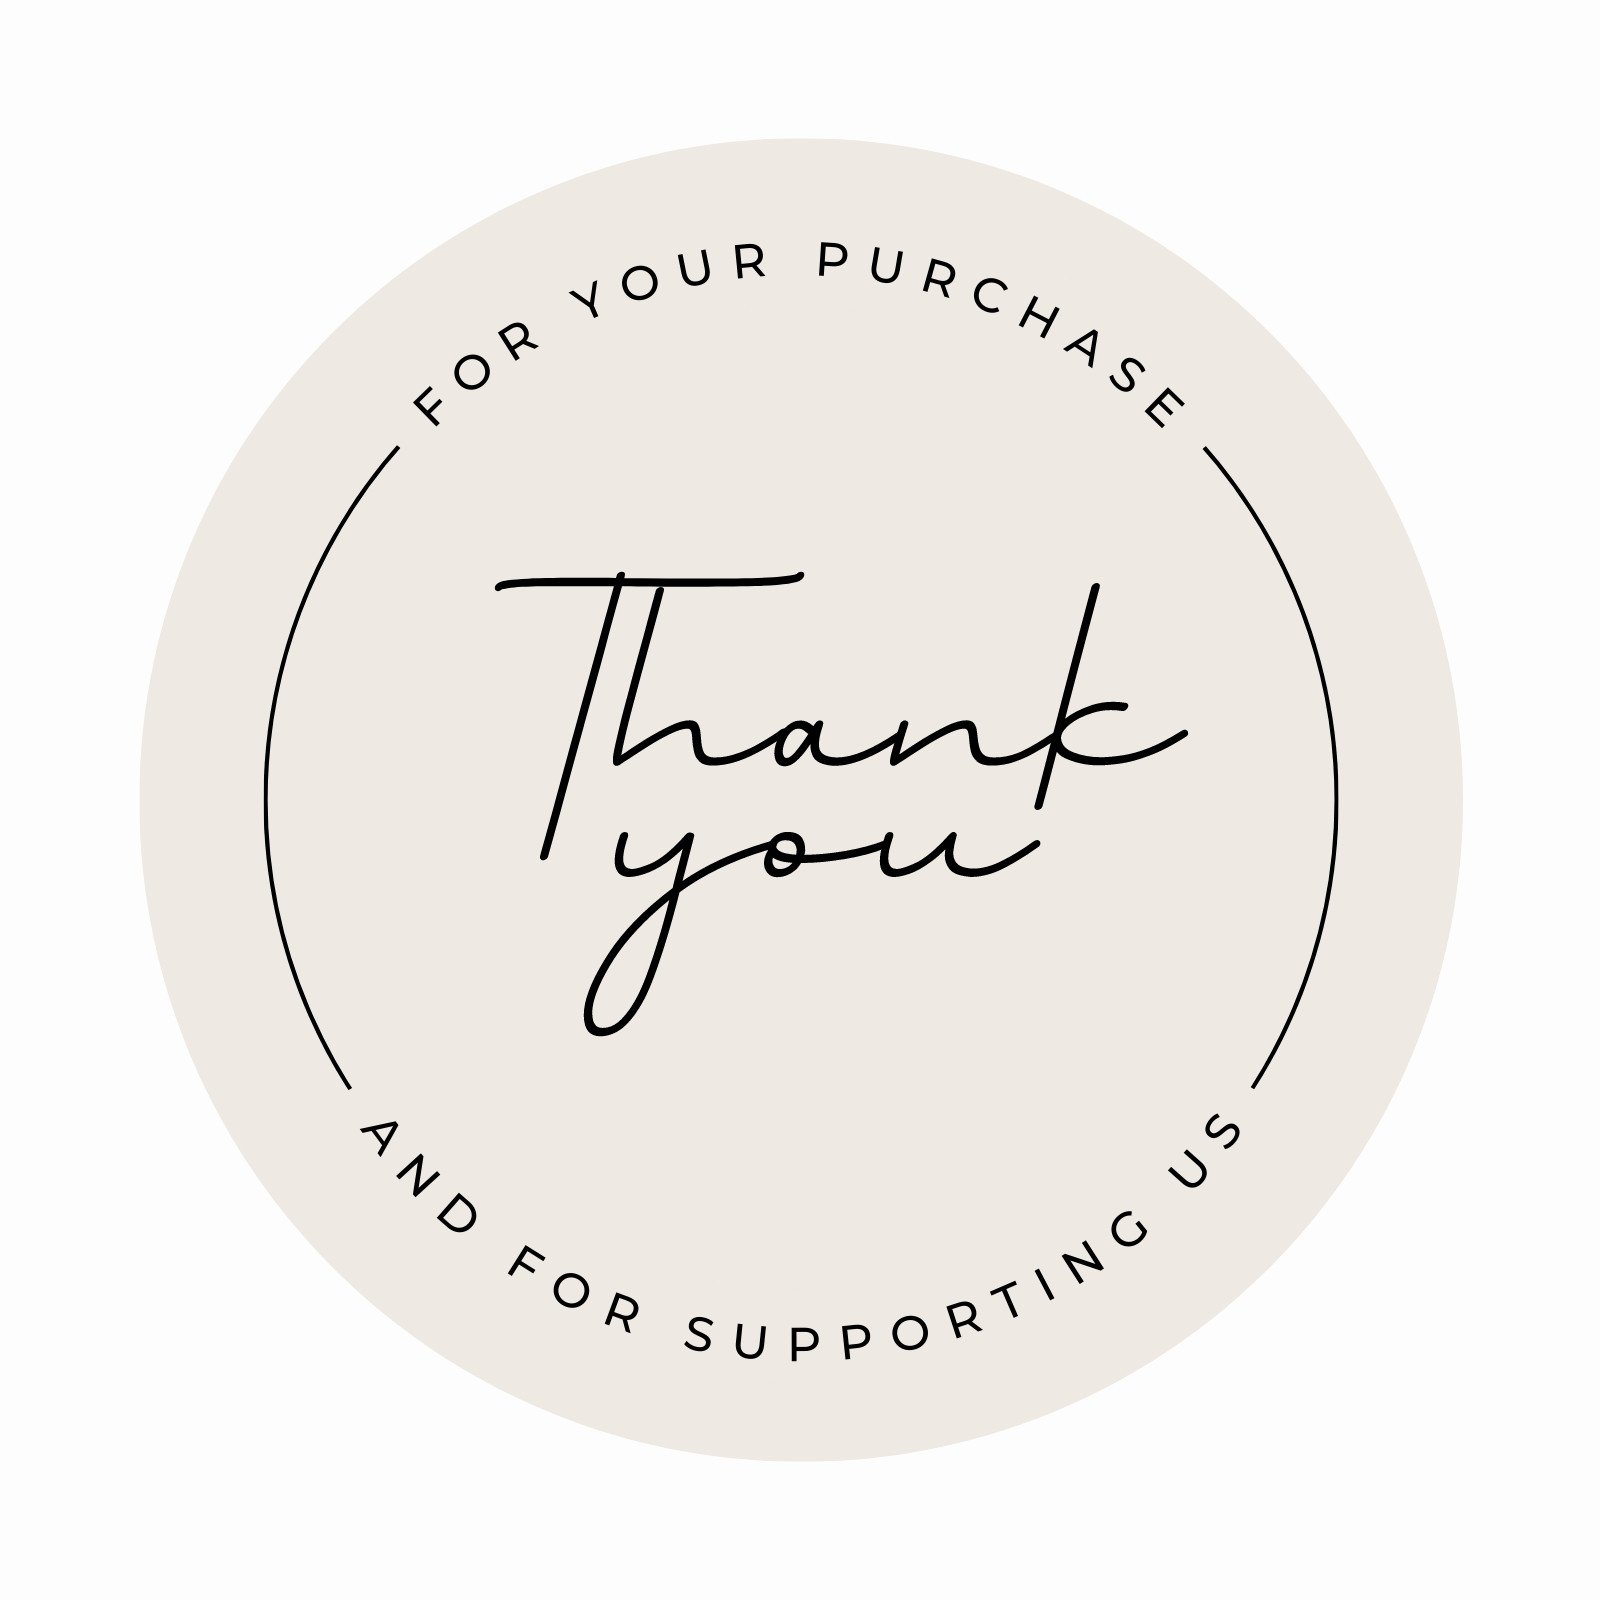 Free printable business thank you stickers